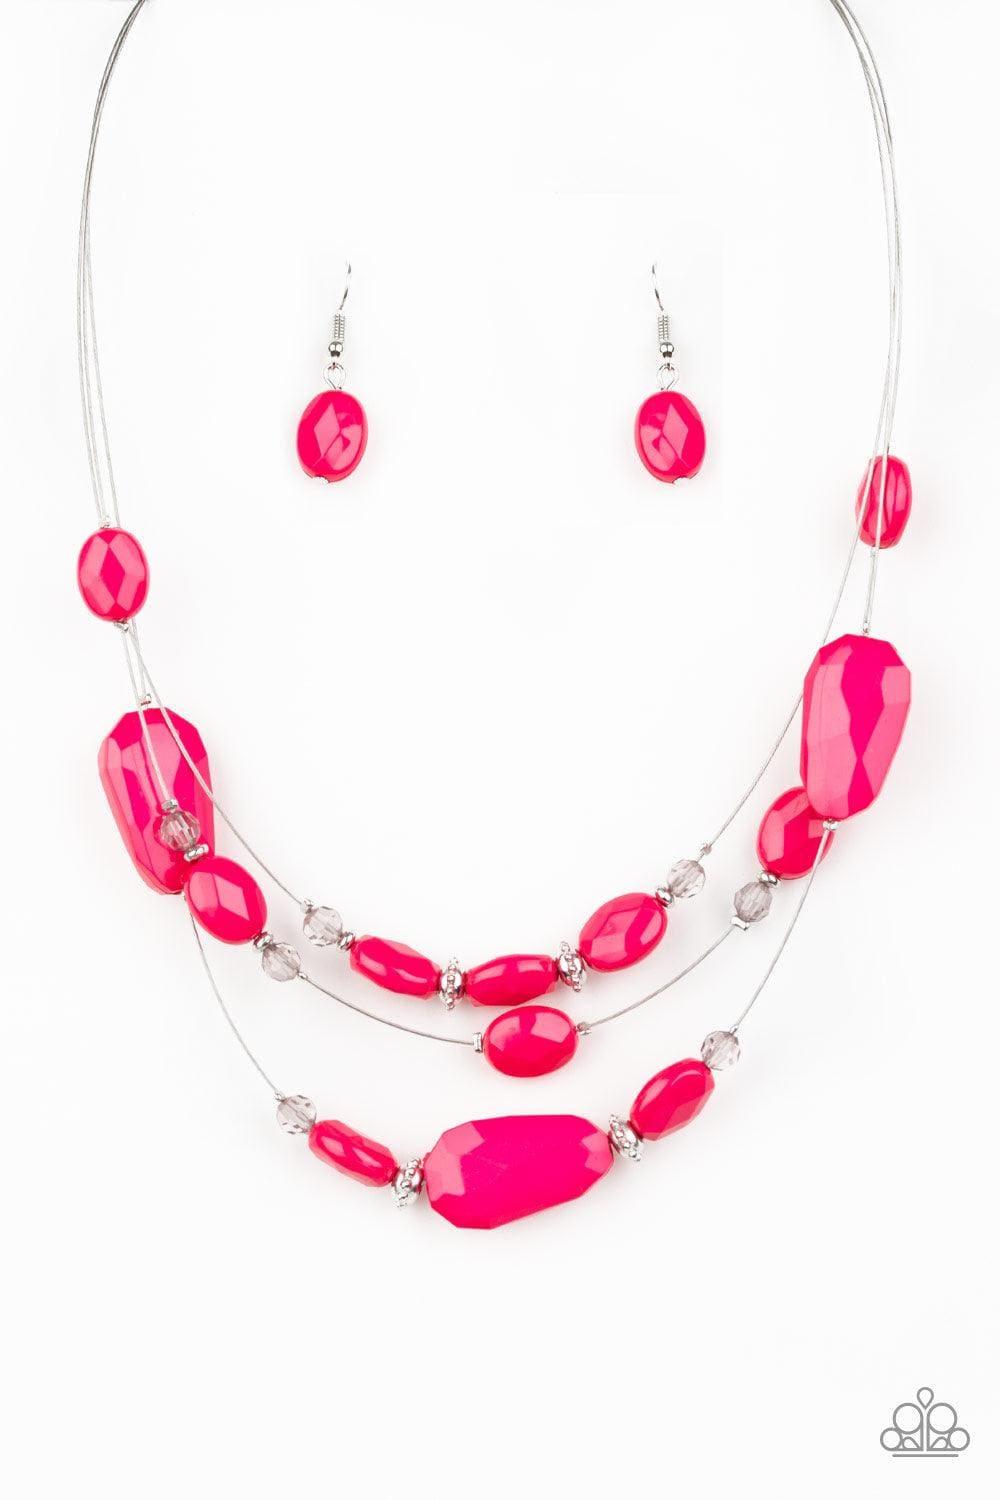 Paparazzi Accessories - Radiant Reflections - Pink Necklace - Bling by JessieK